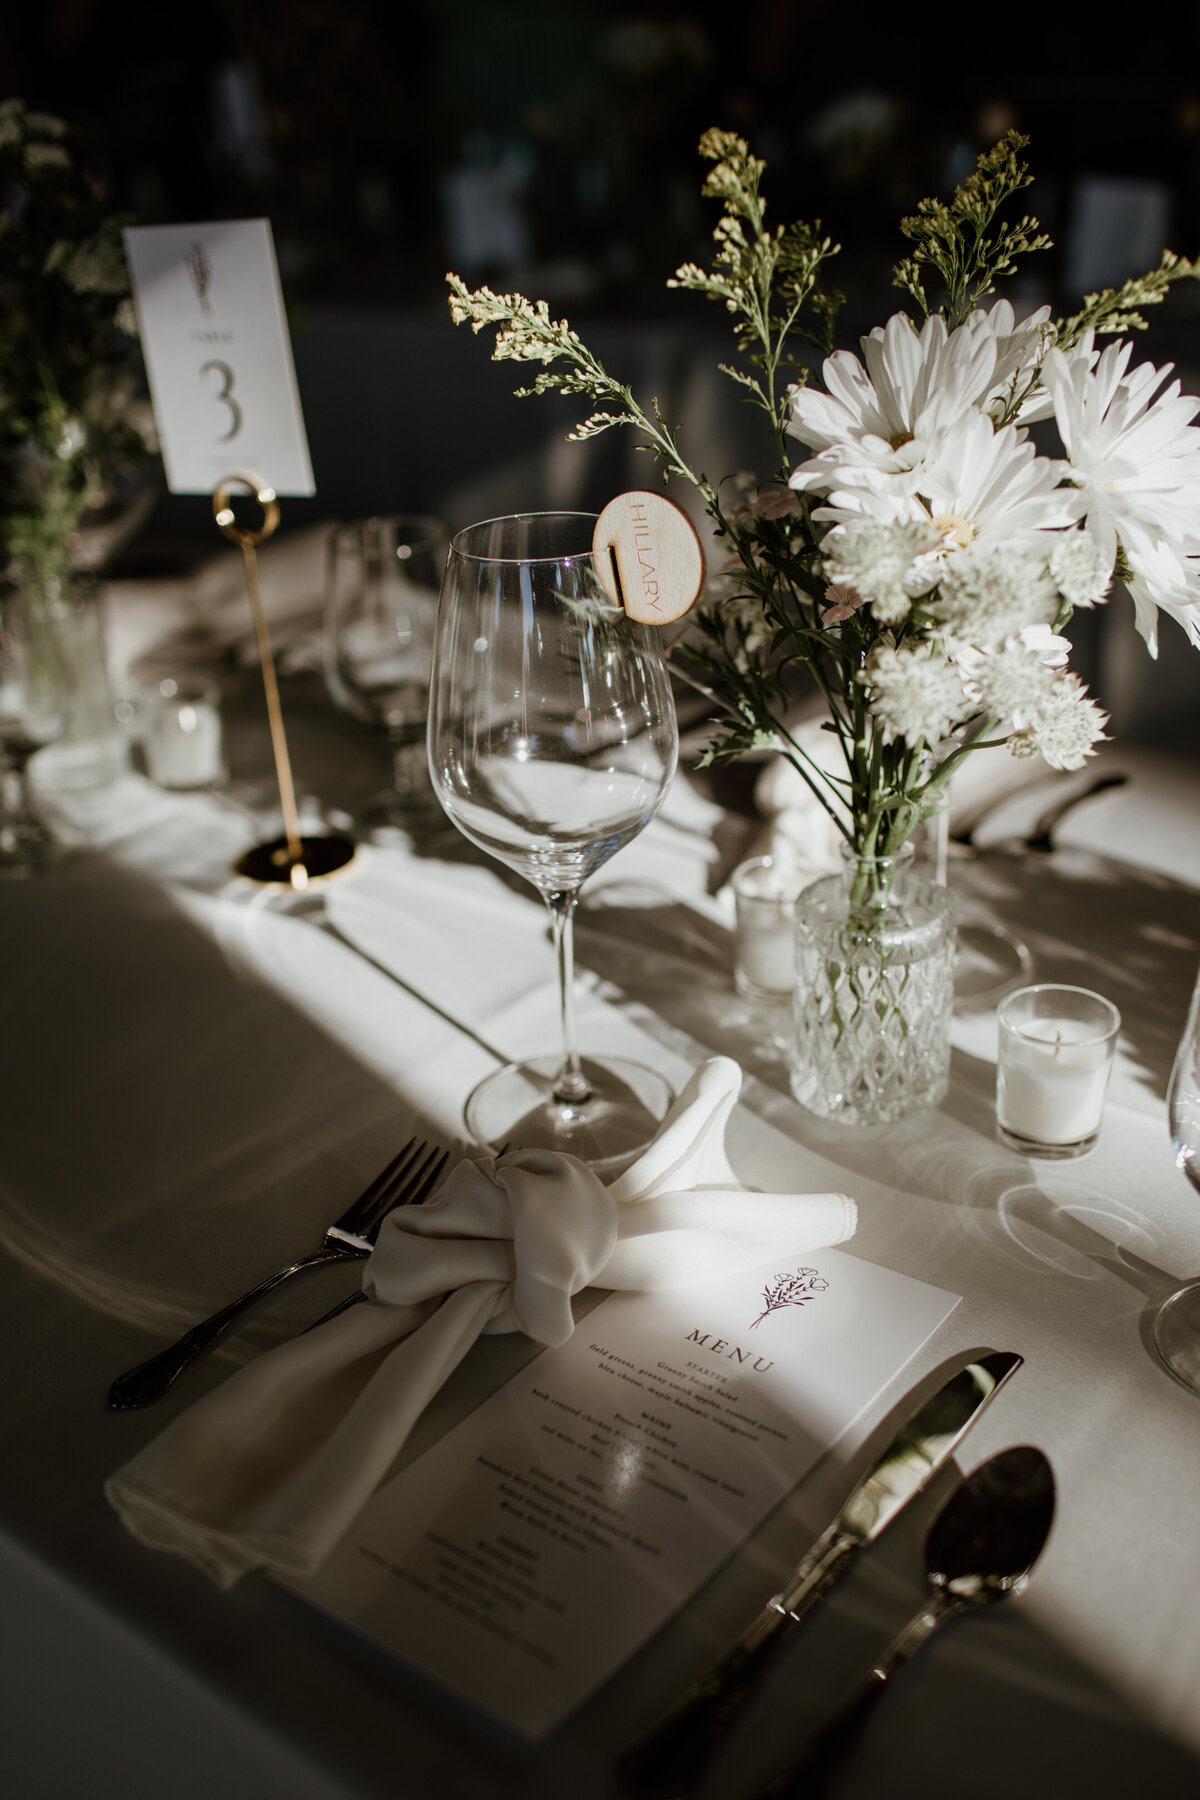 Details of a sunkissed tablescape captured by Fort Worth wedding photographer, Megan Christine Studio